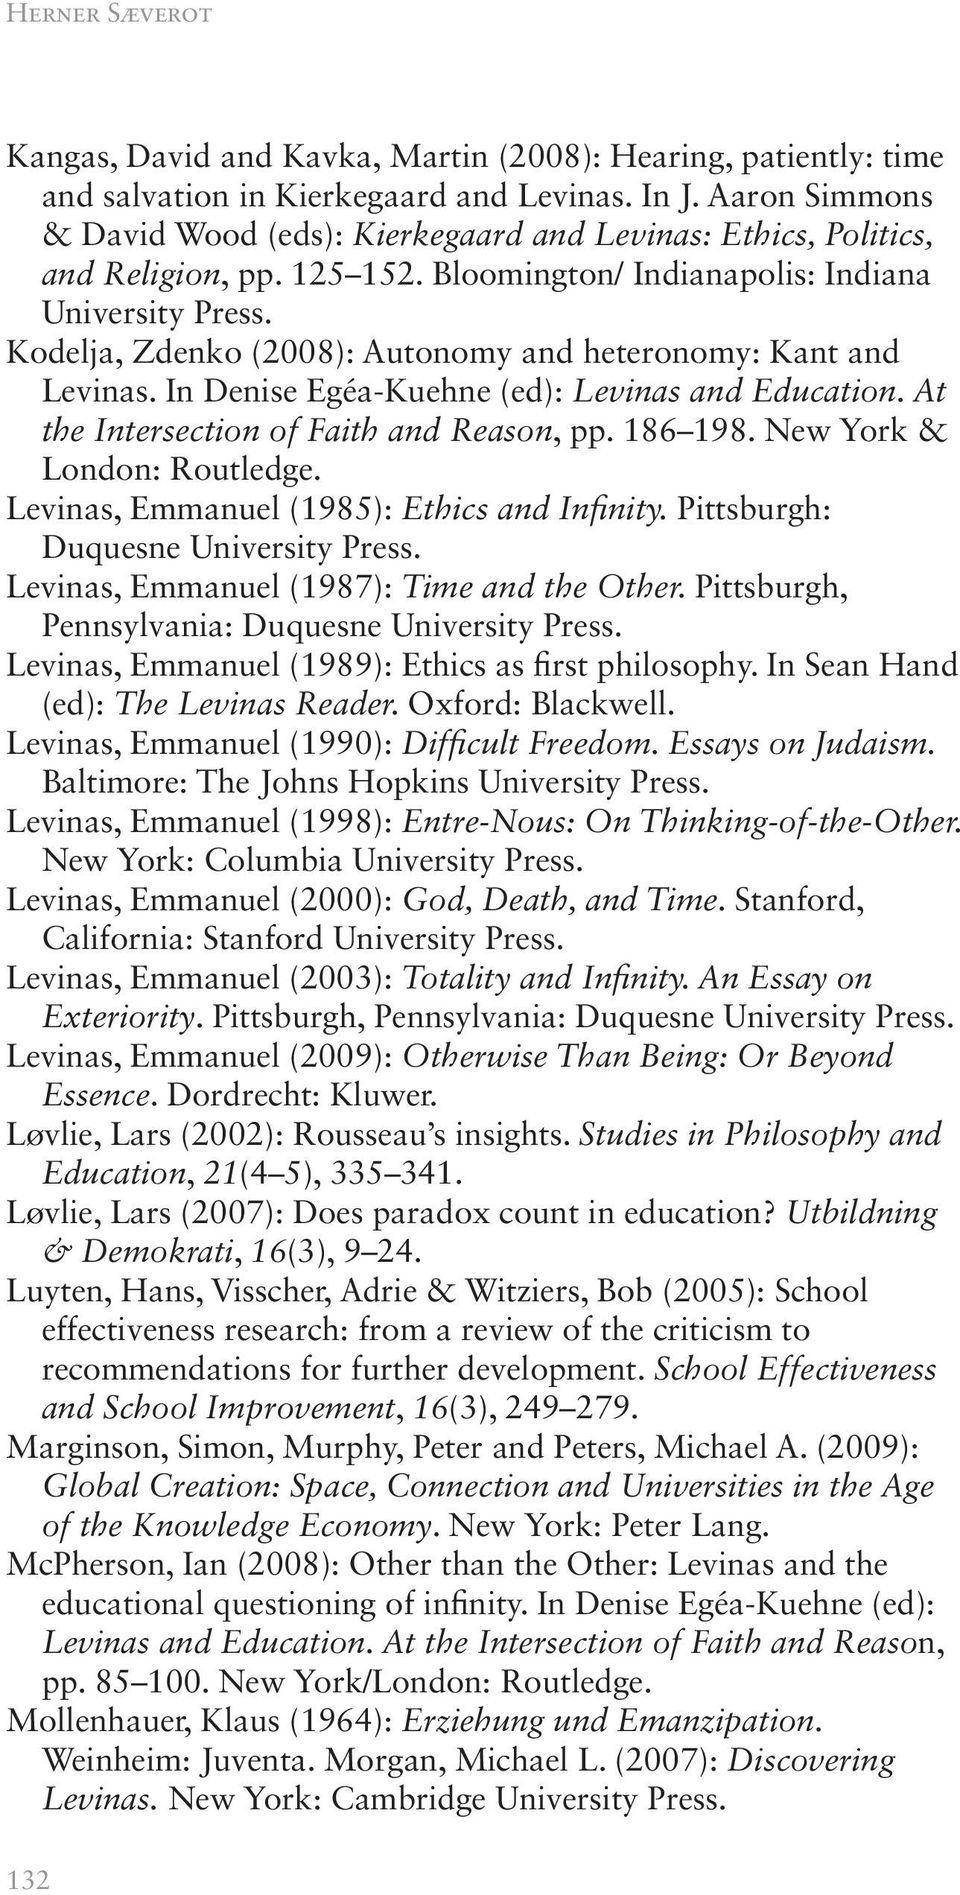 Kodelja, Zdenko (2008): Autonomy and heteronomy: Kant and Levinas. In Denise Egéa-Kuehne (ed): Levinas and Education. At the Intersection of Faith and Reason, pp. 186 198.